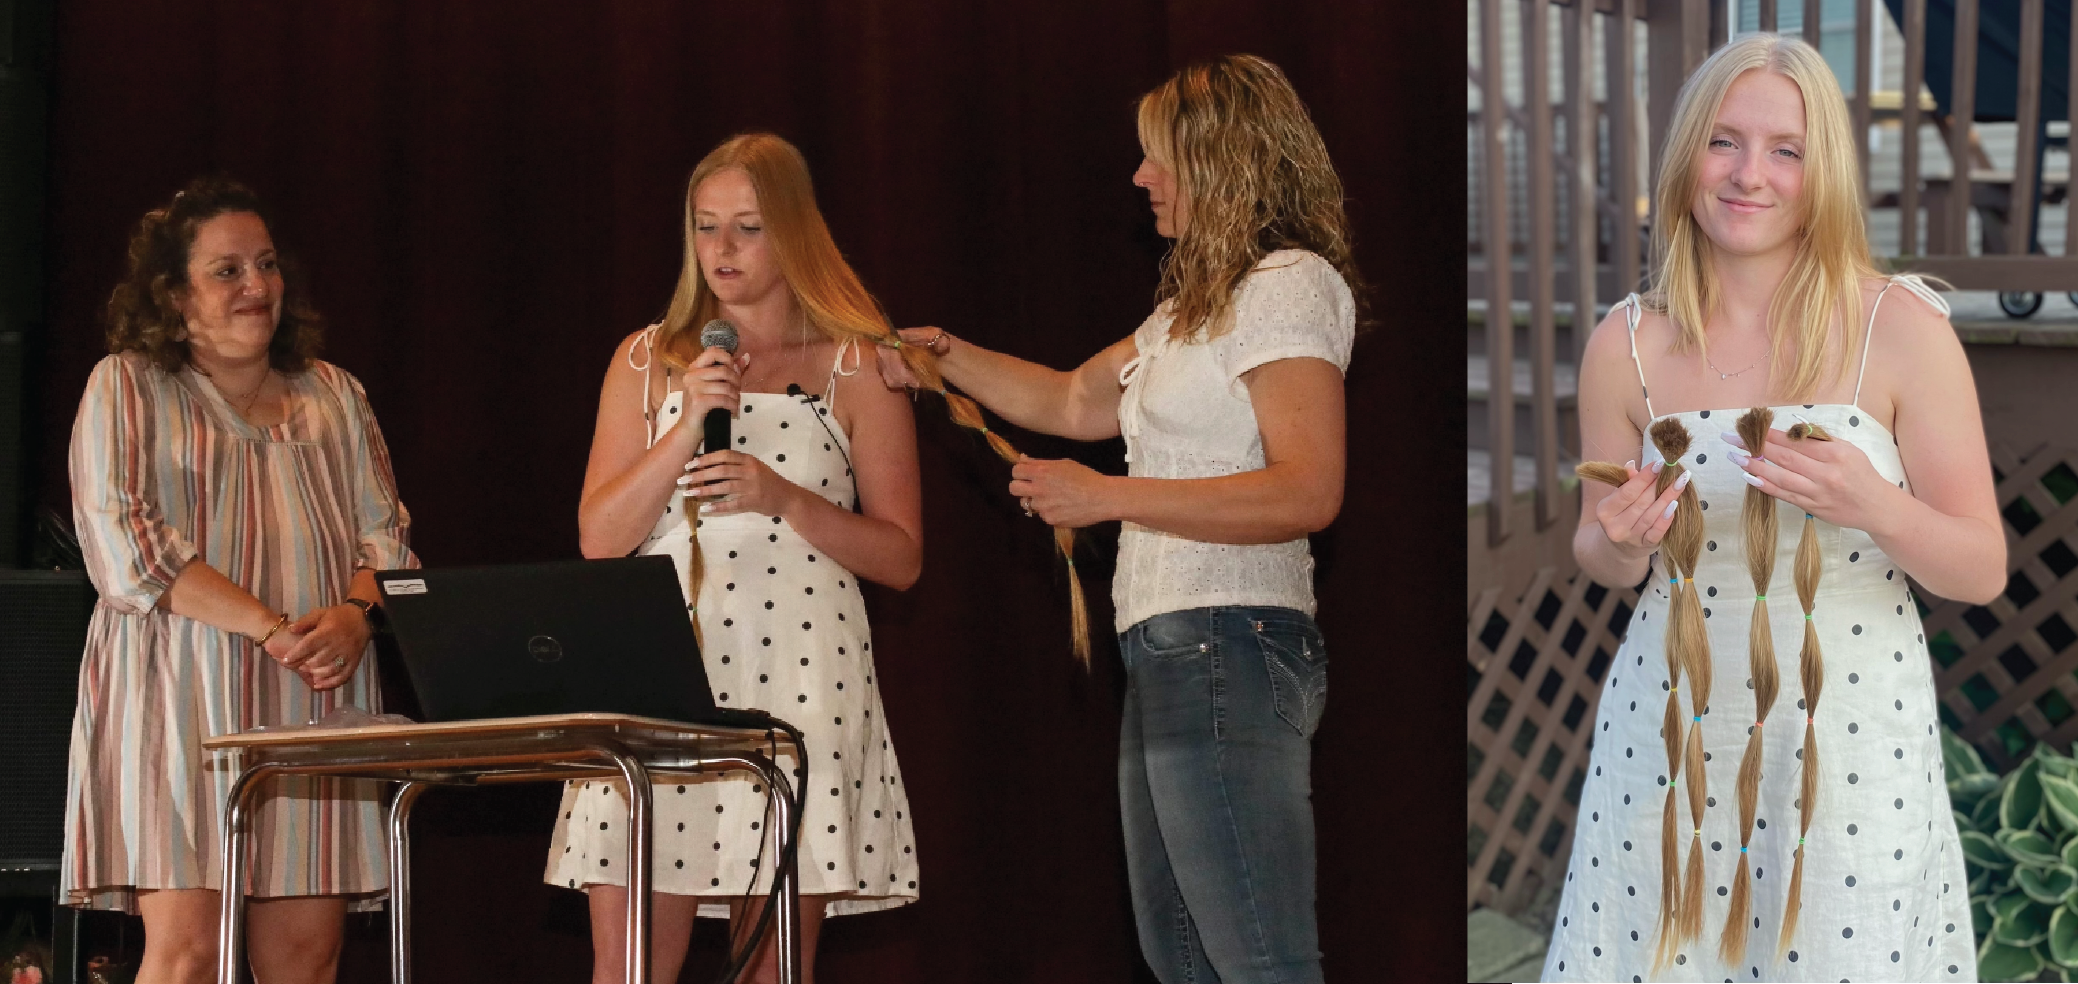 Click to read article: High School Student Donates Hair, Raises Awareness & Funds'